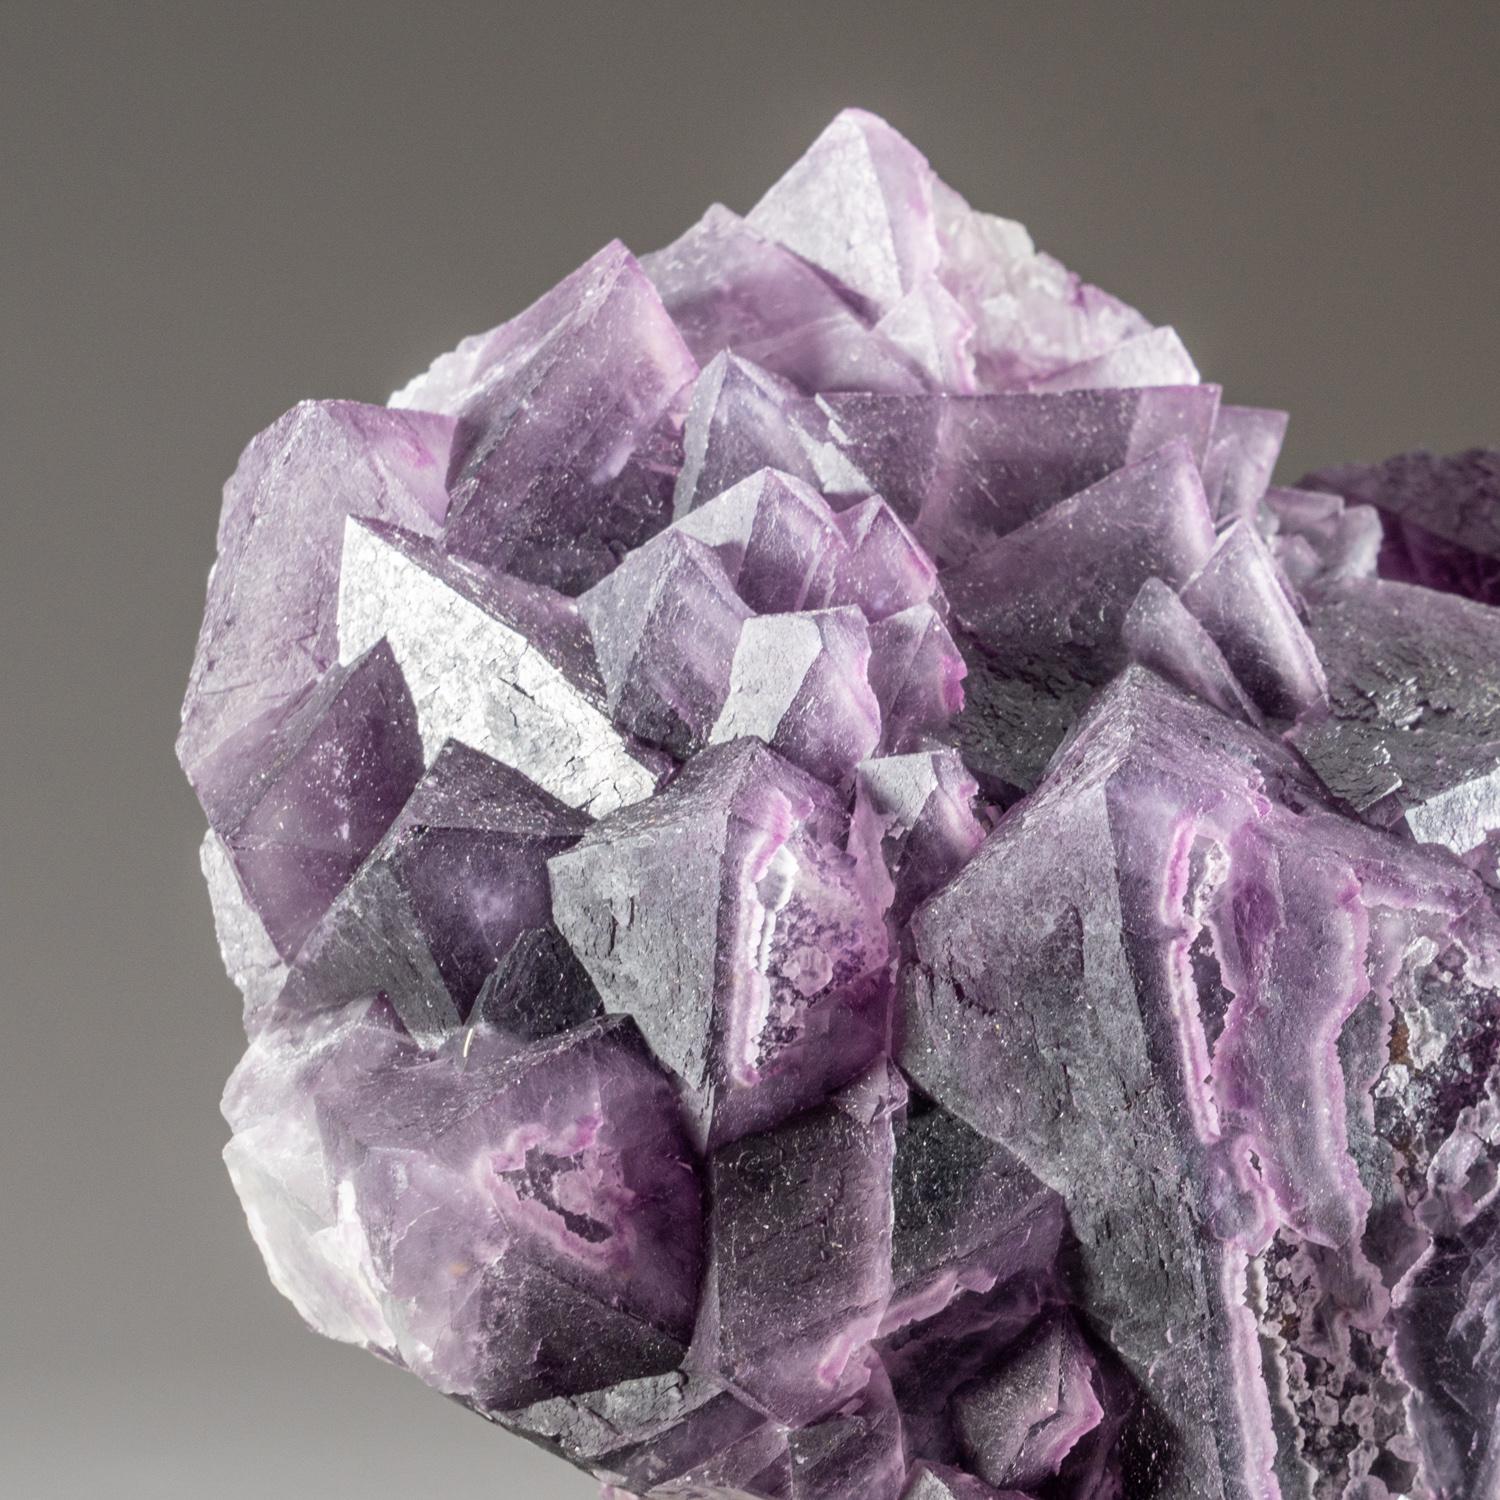 Large cluster of lustrous cubic fluorite crystals with surfaces composed of many smaller parallel cubic faces. The fluorite crystals have medium-purple outer layer over deep-purple core zones.

 

Weight: 3.7 lbs, Size: 6 x 5 x 3 inches.